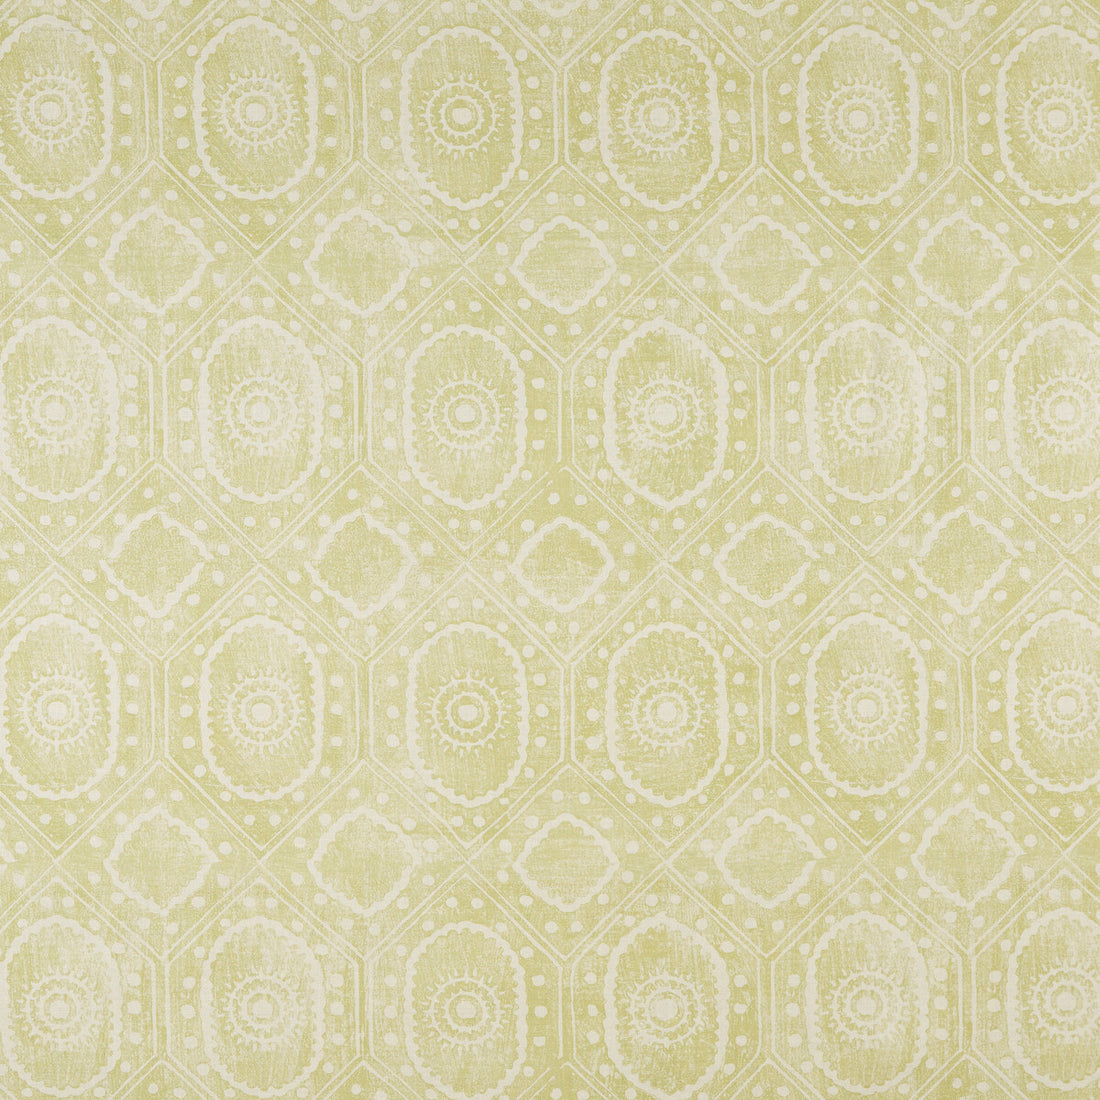 Diamond fabric in lime color - pattern BFC-3643.3.0 - by Lee Jofa in the Blithfield collection